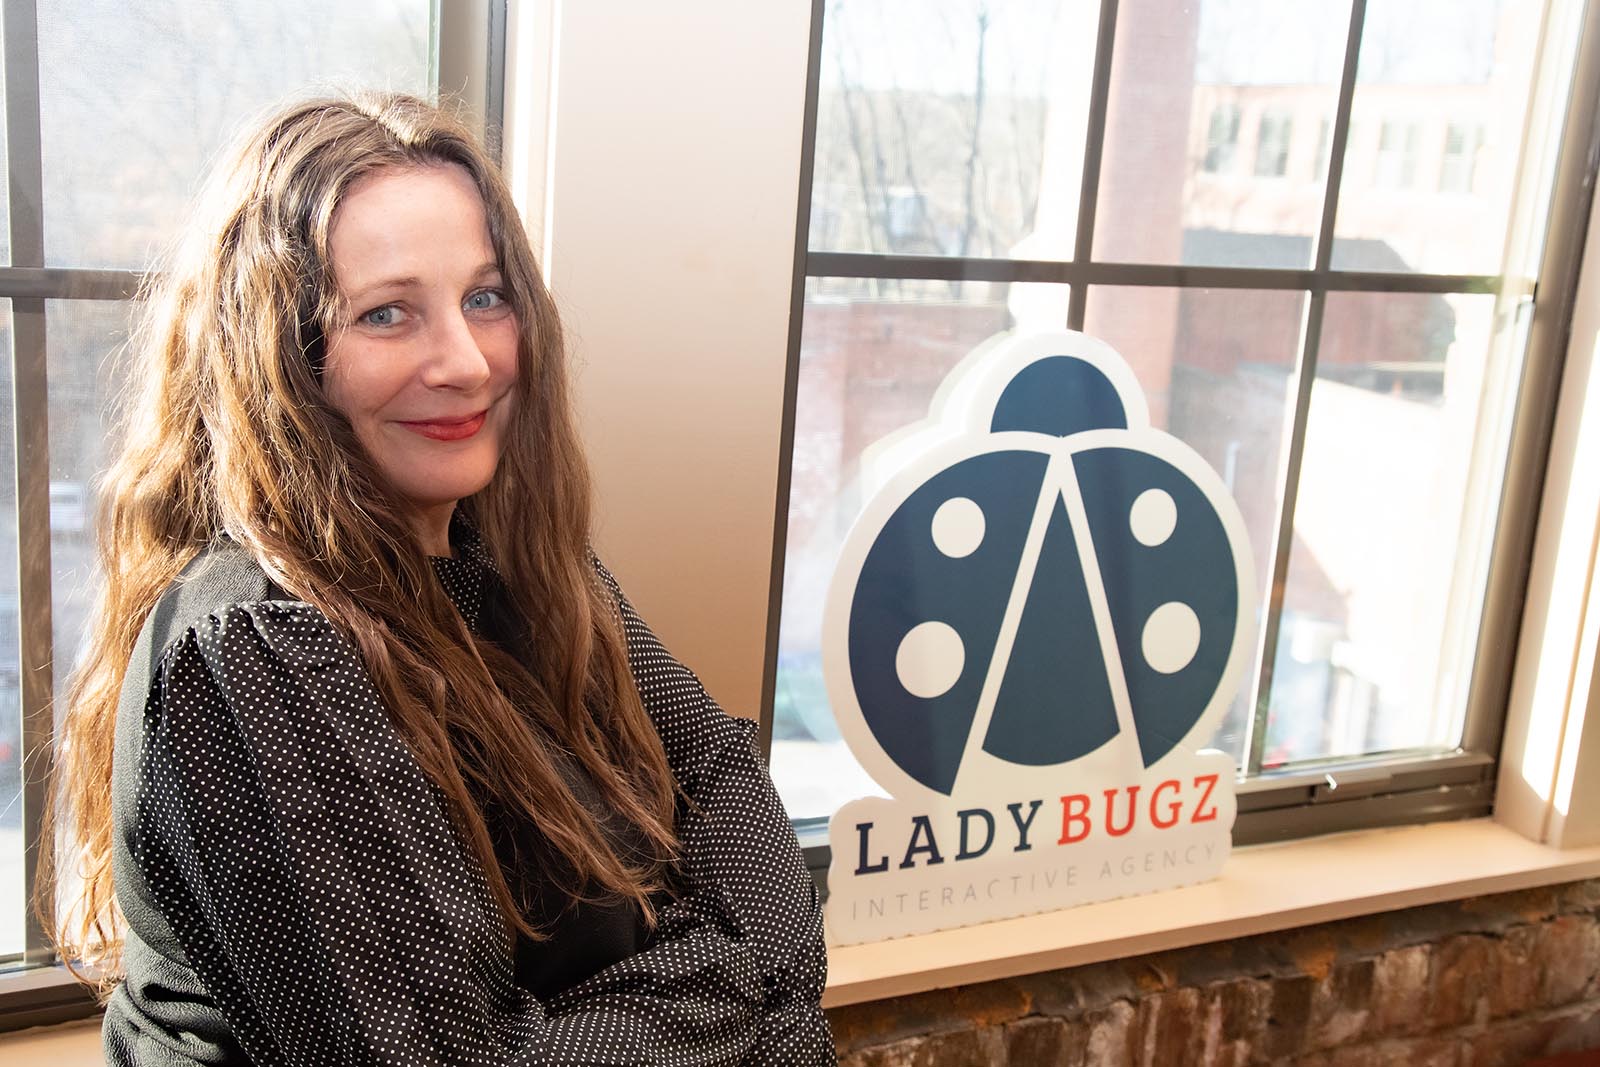 Lysa Miller, founder and CEO of Ladybugz Interactive Agency